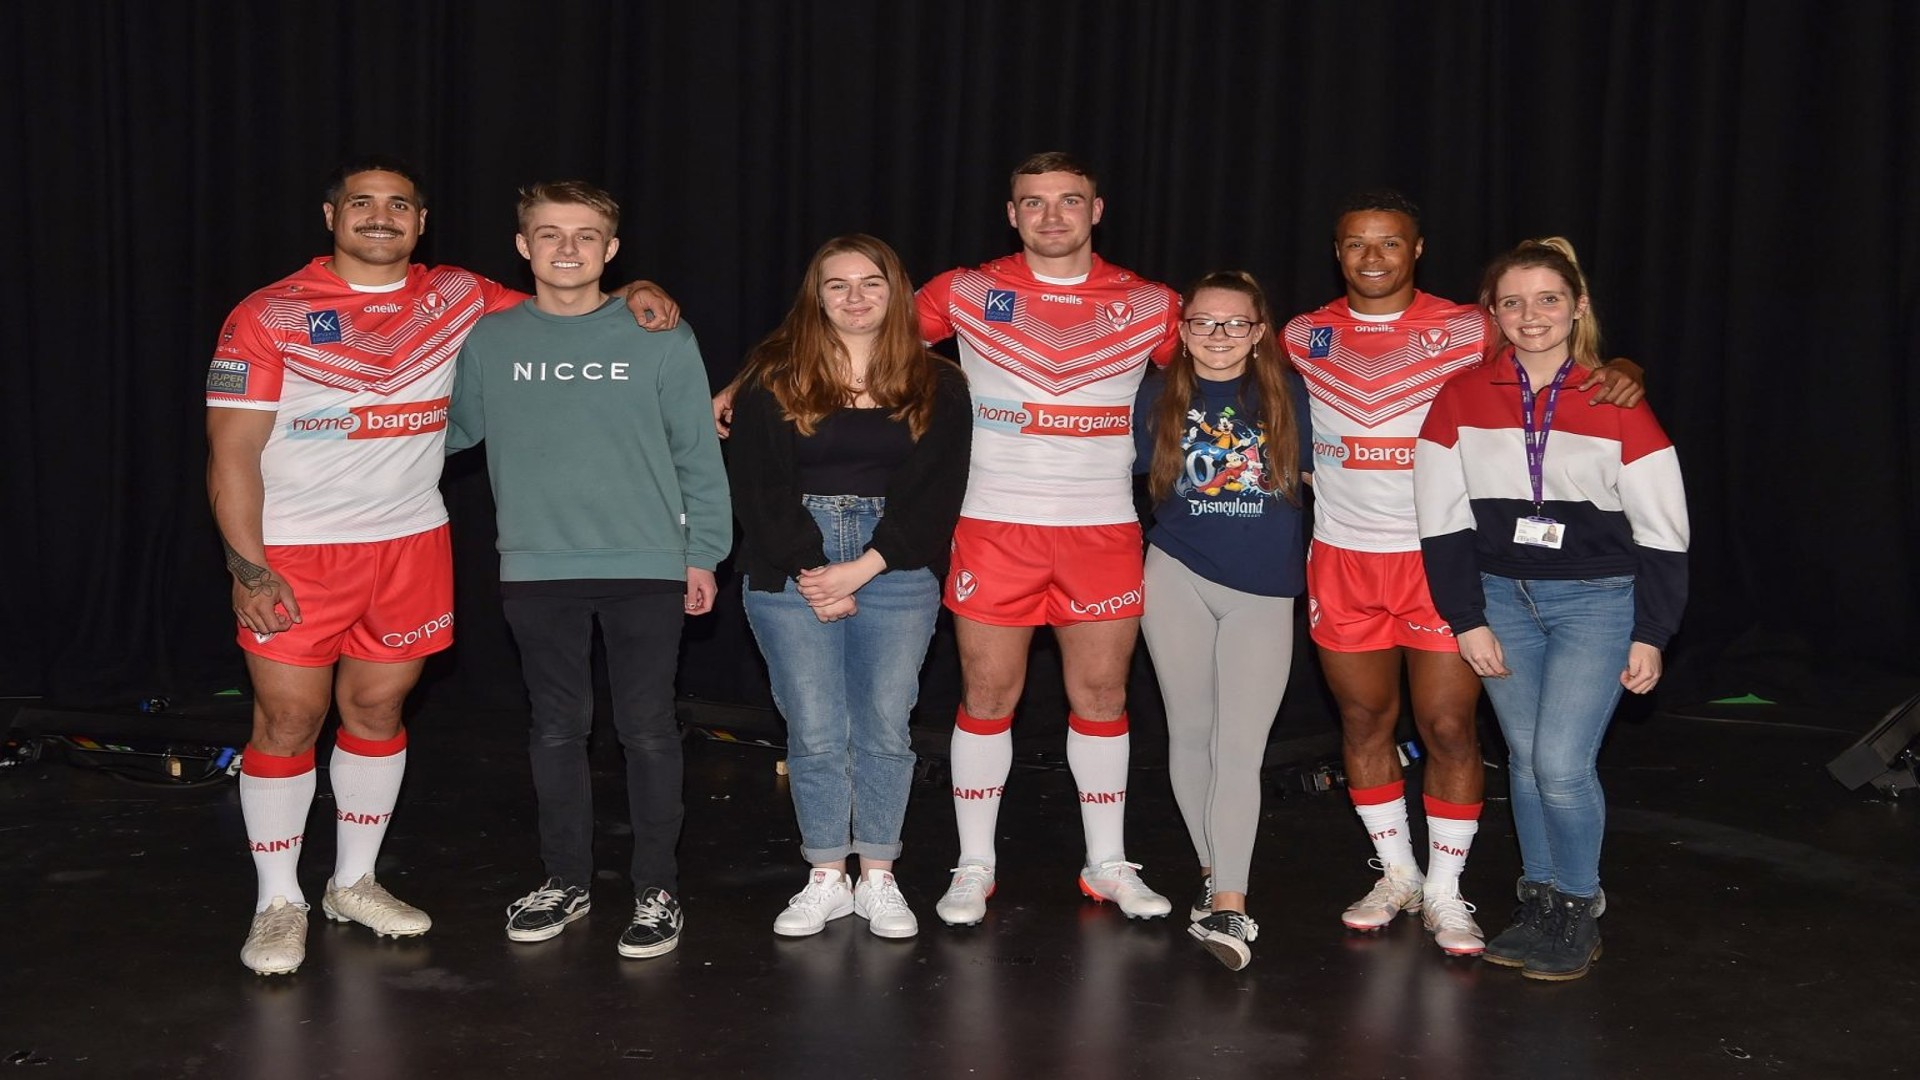 Edge Hill students stood with St Helens rugby players